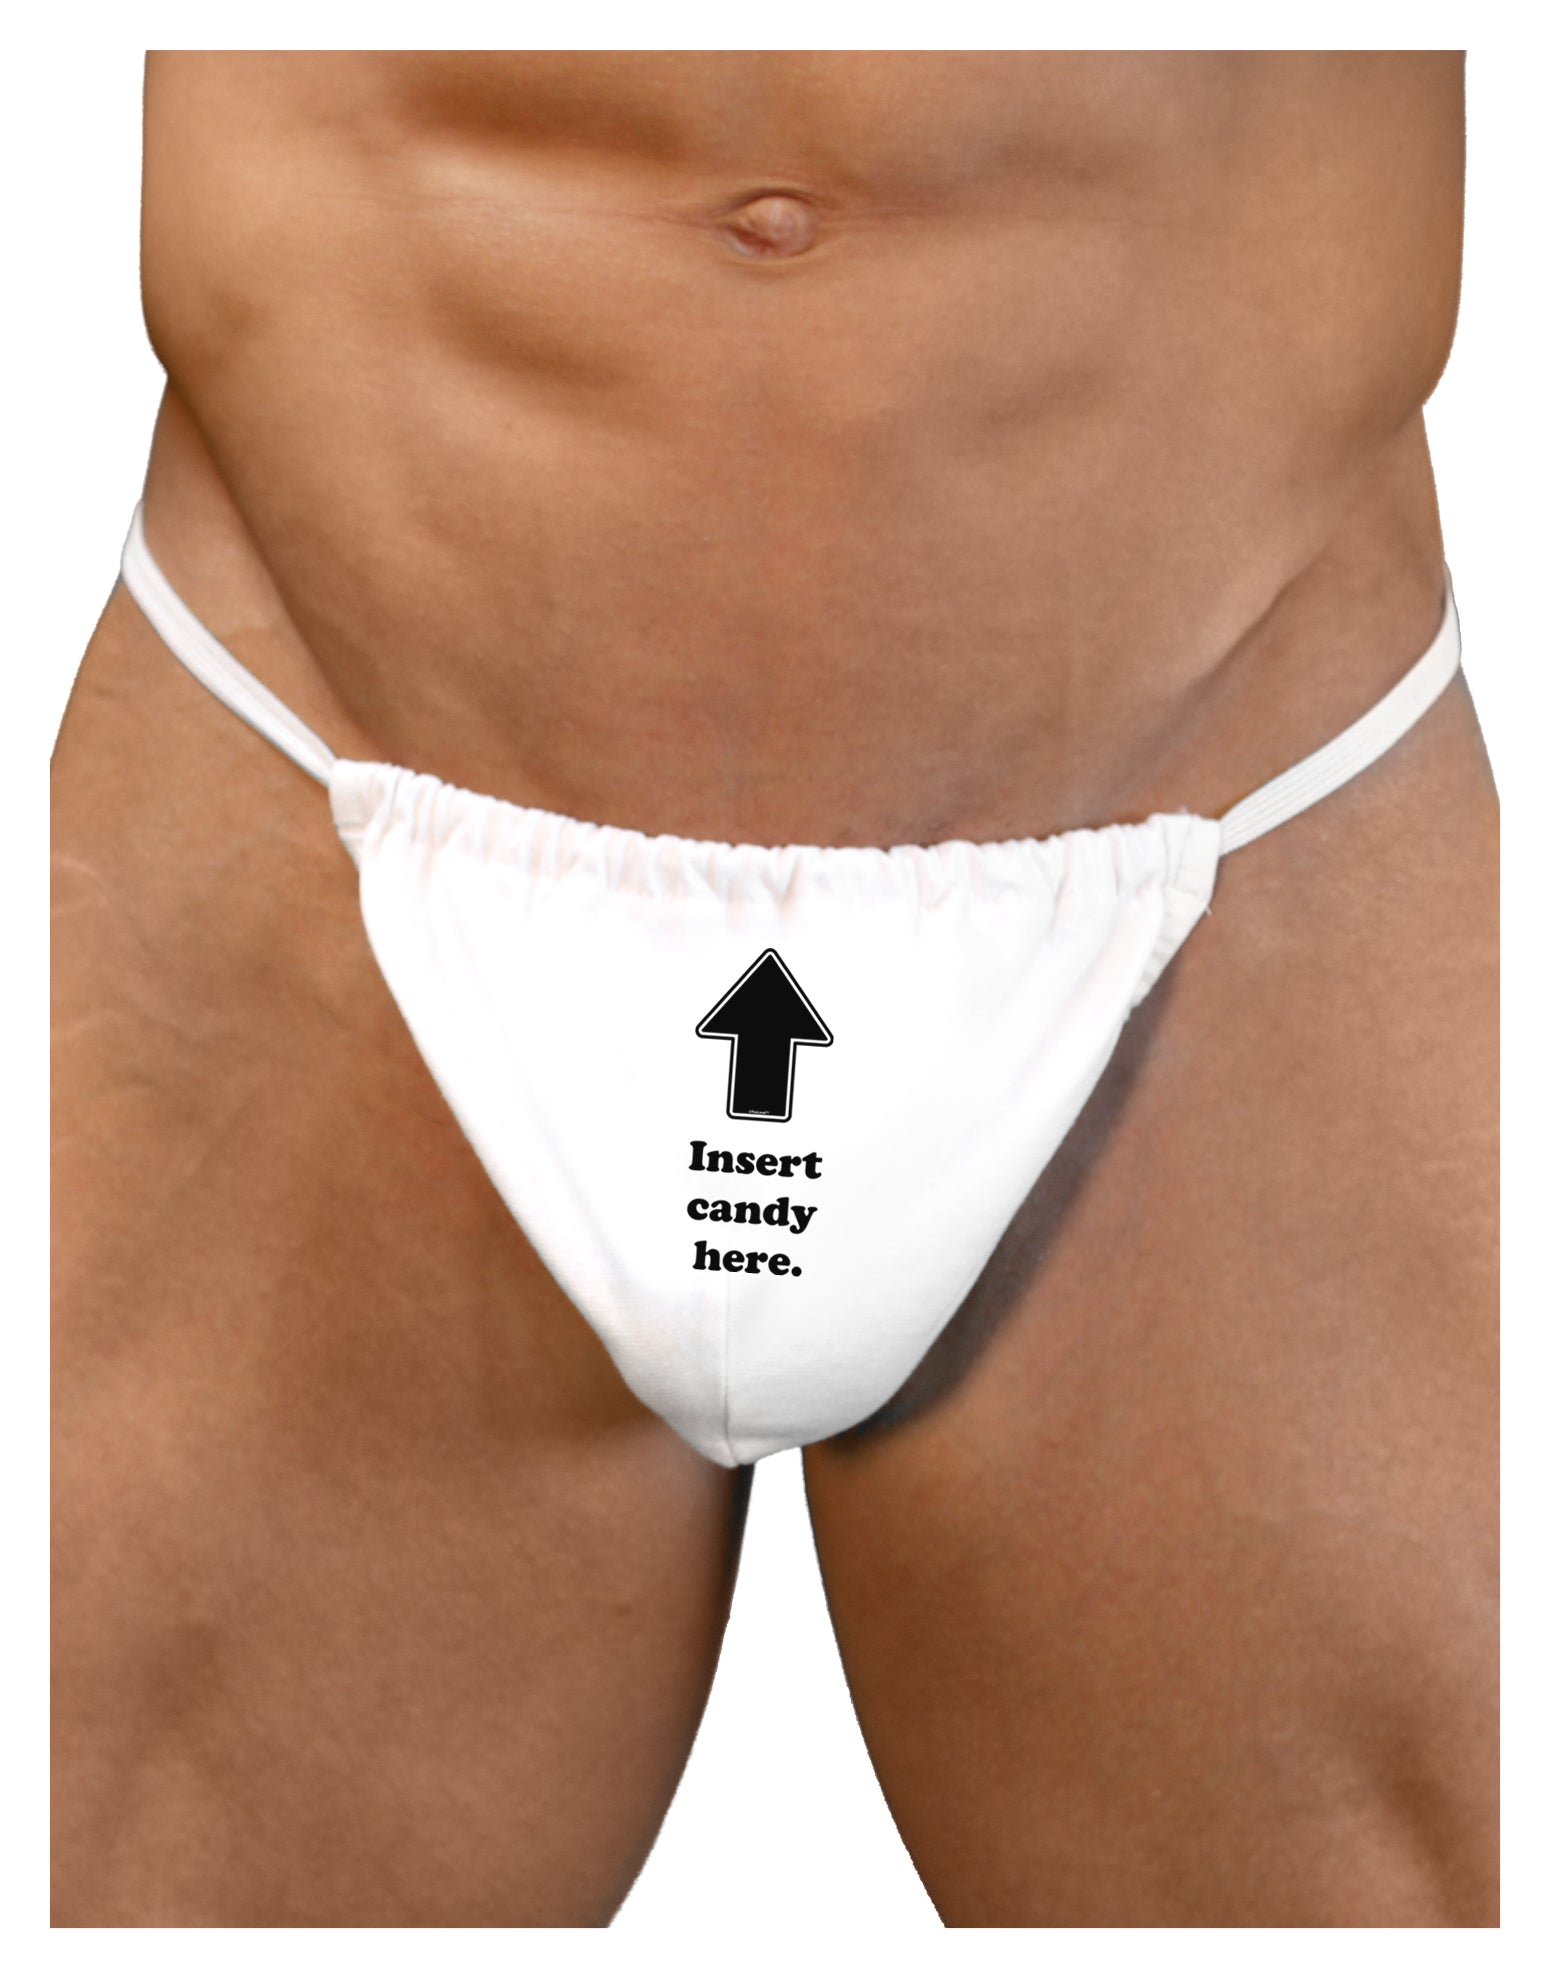 Insert Candy Here - Funny Mens G-String Underwear